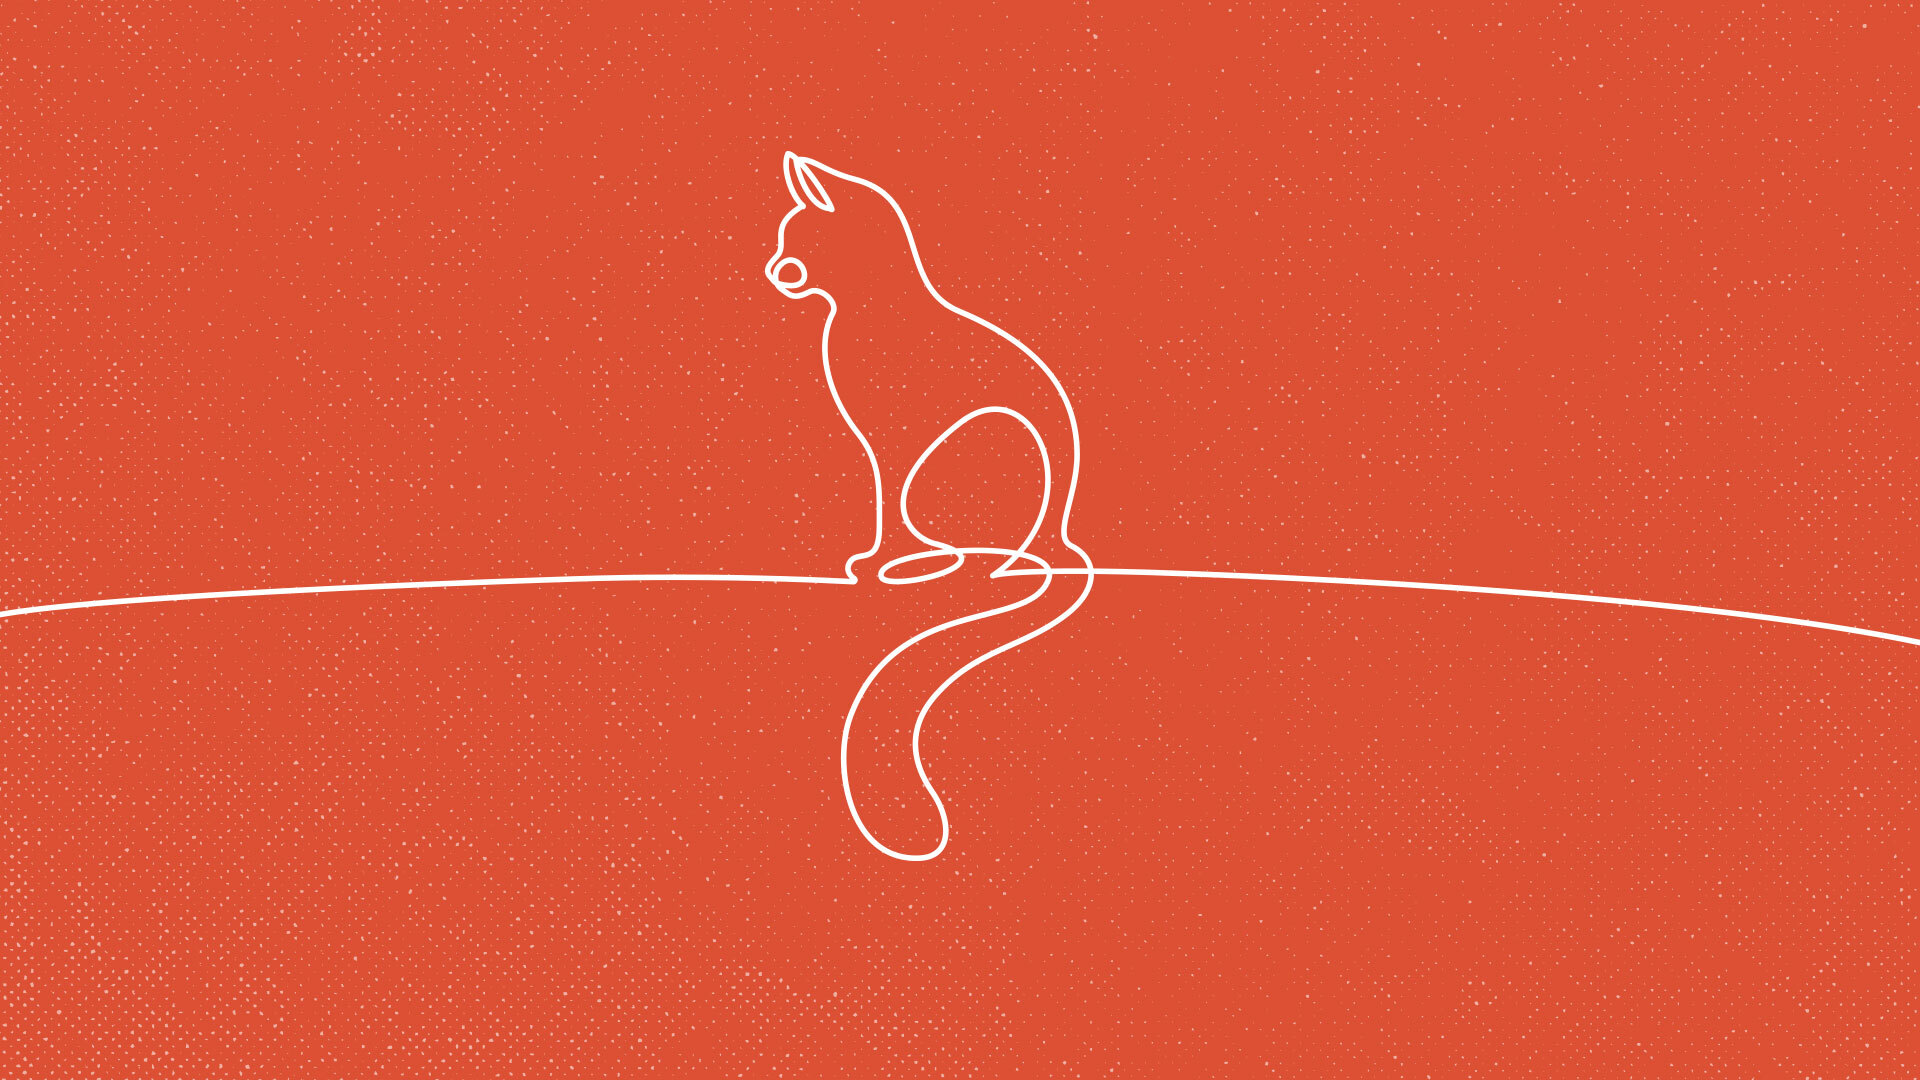 A line drawing of a cat